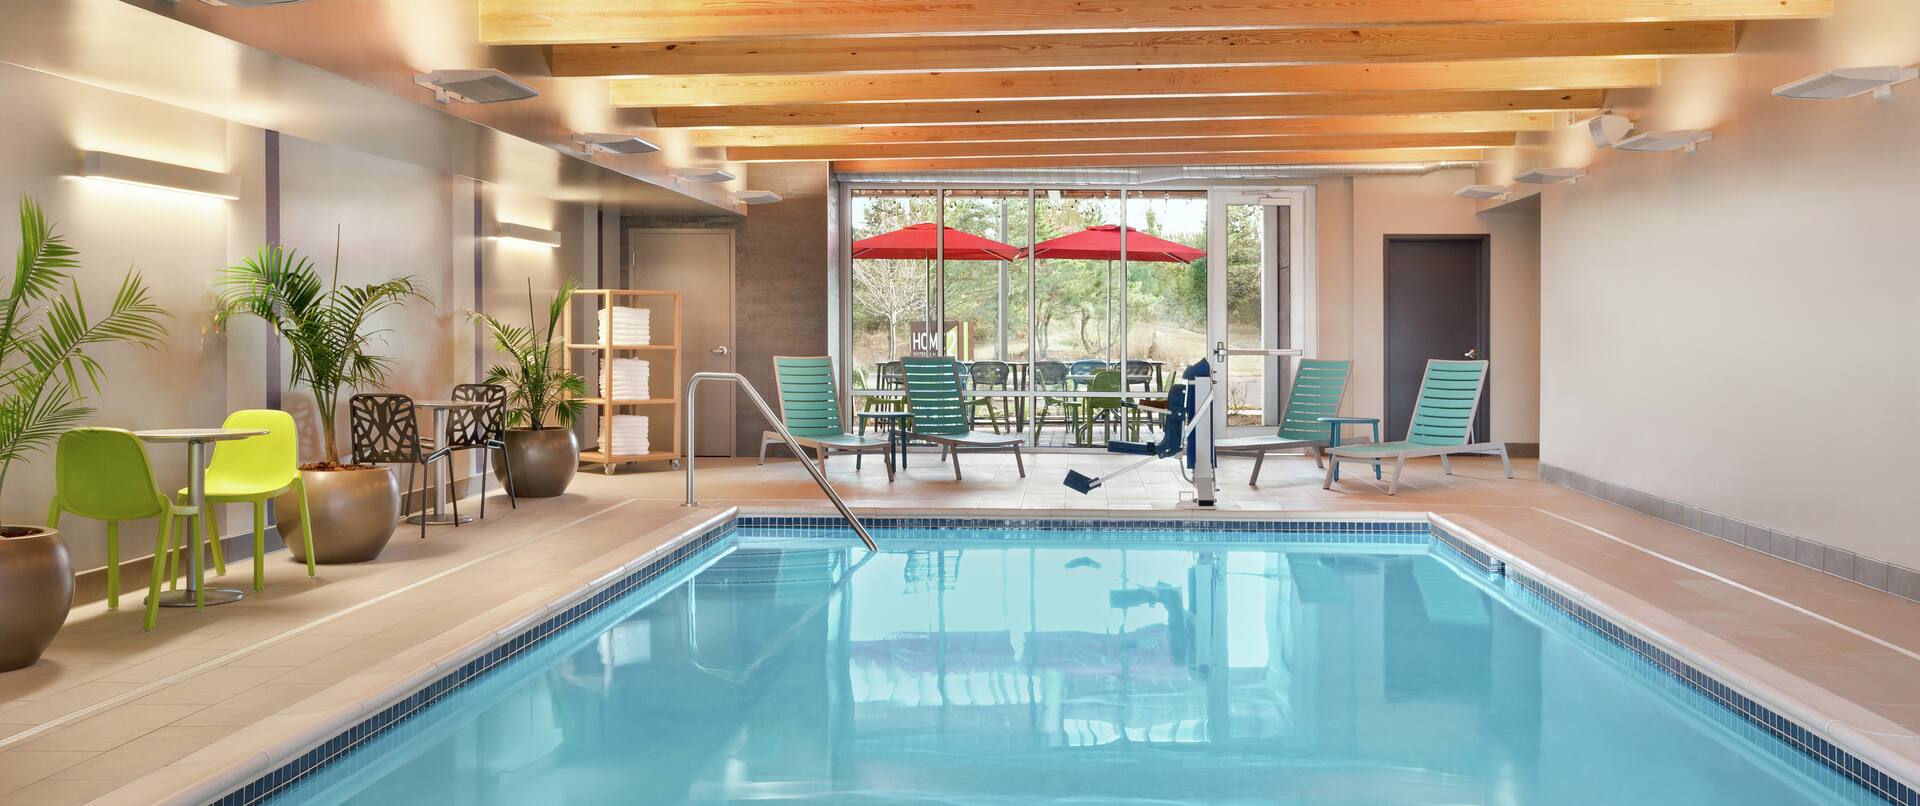 Indoor swimming pool featuring lush plants, lounge chairs, accessible chair lift, and beautiful outside view.